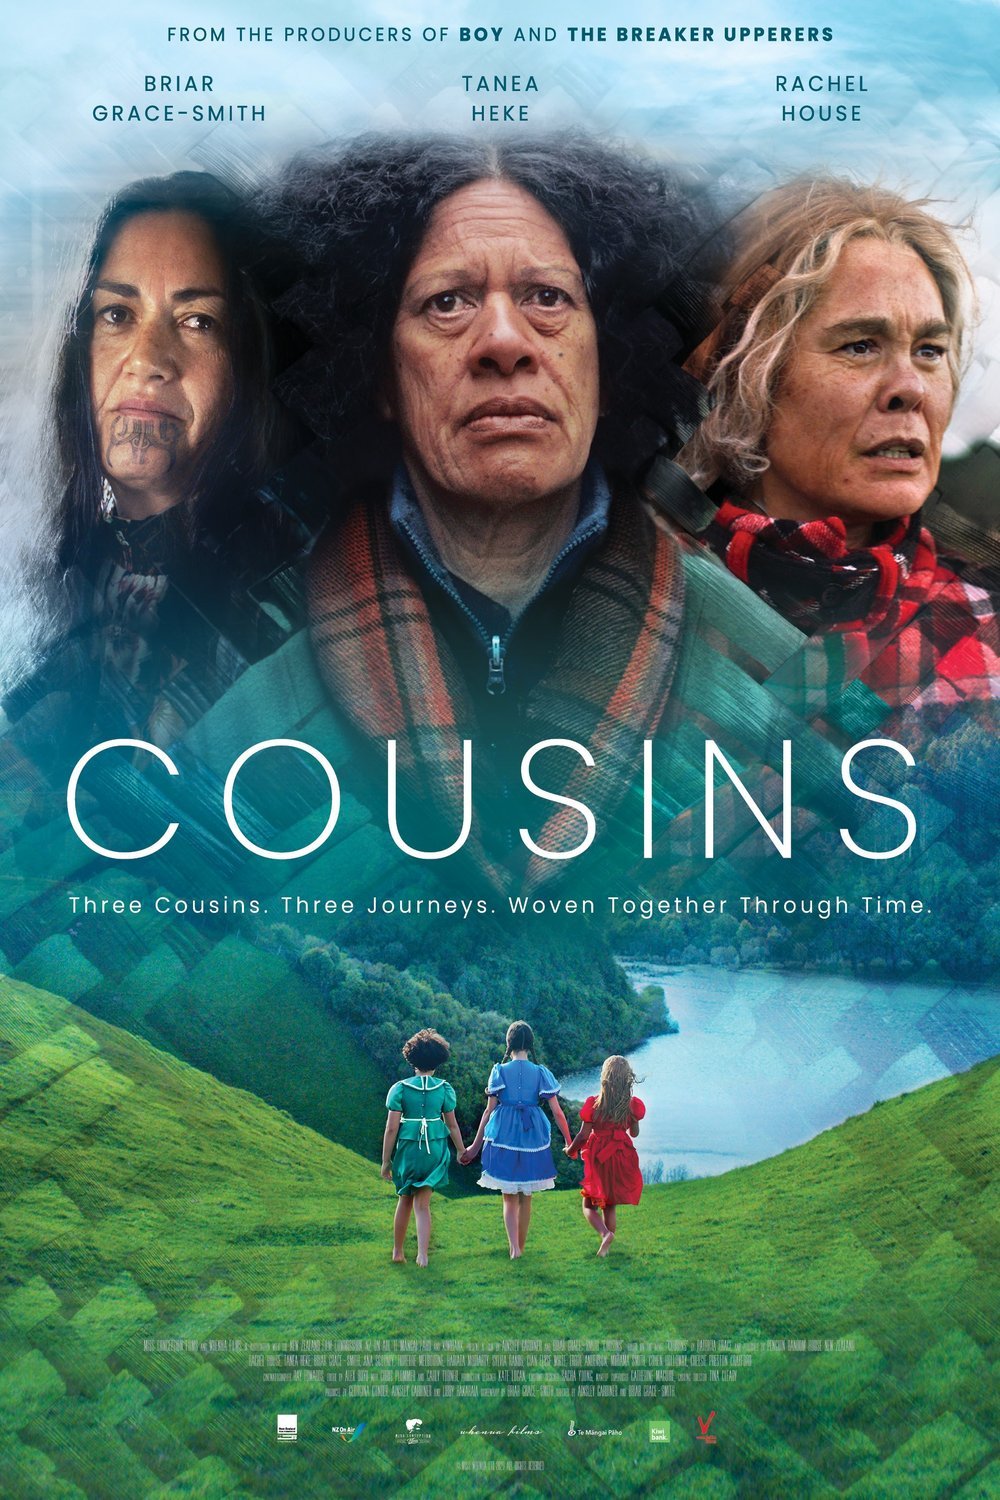 Poster of the movie Cousins